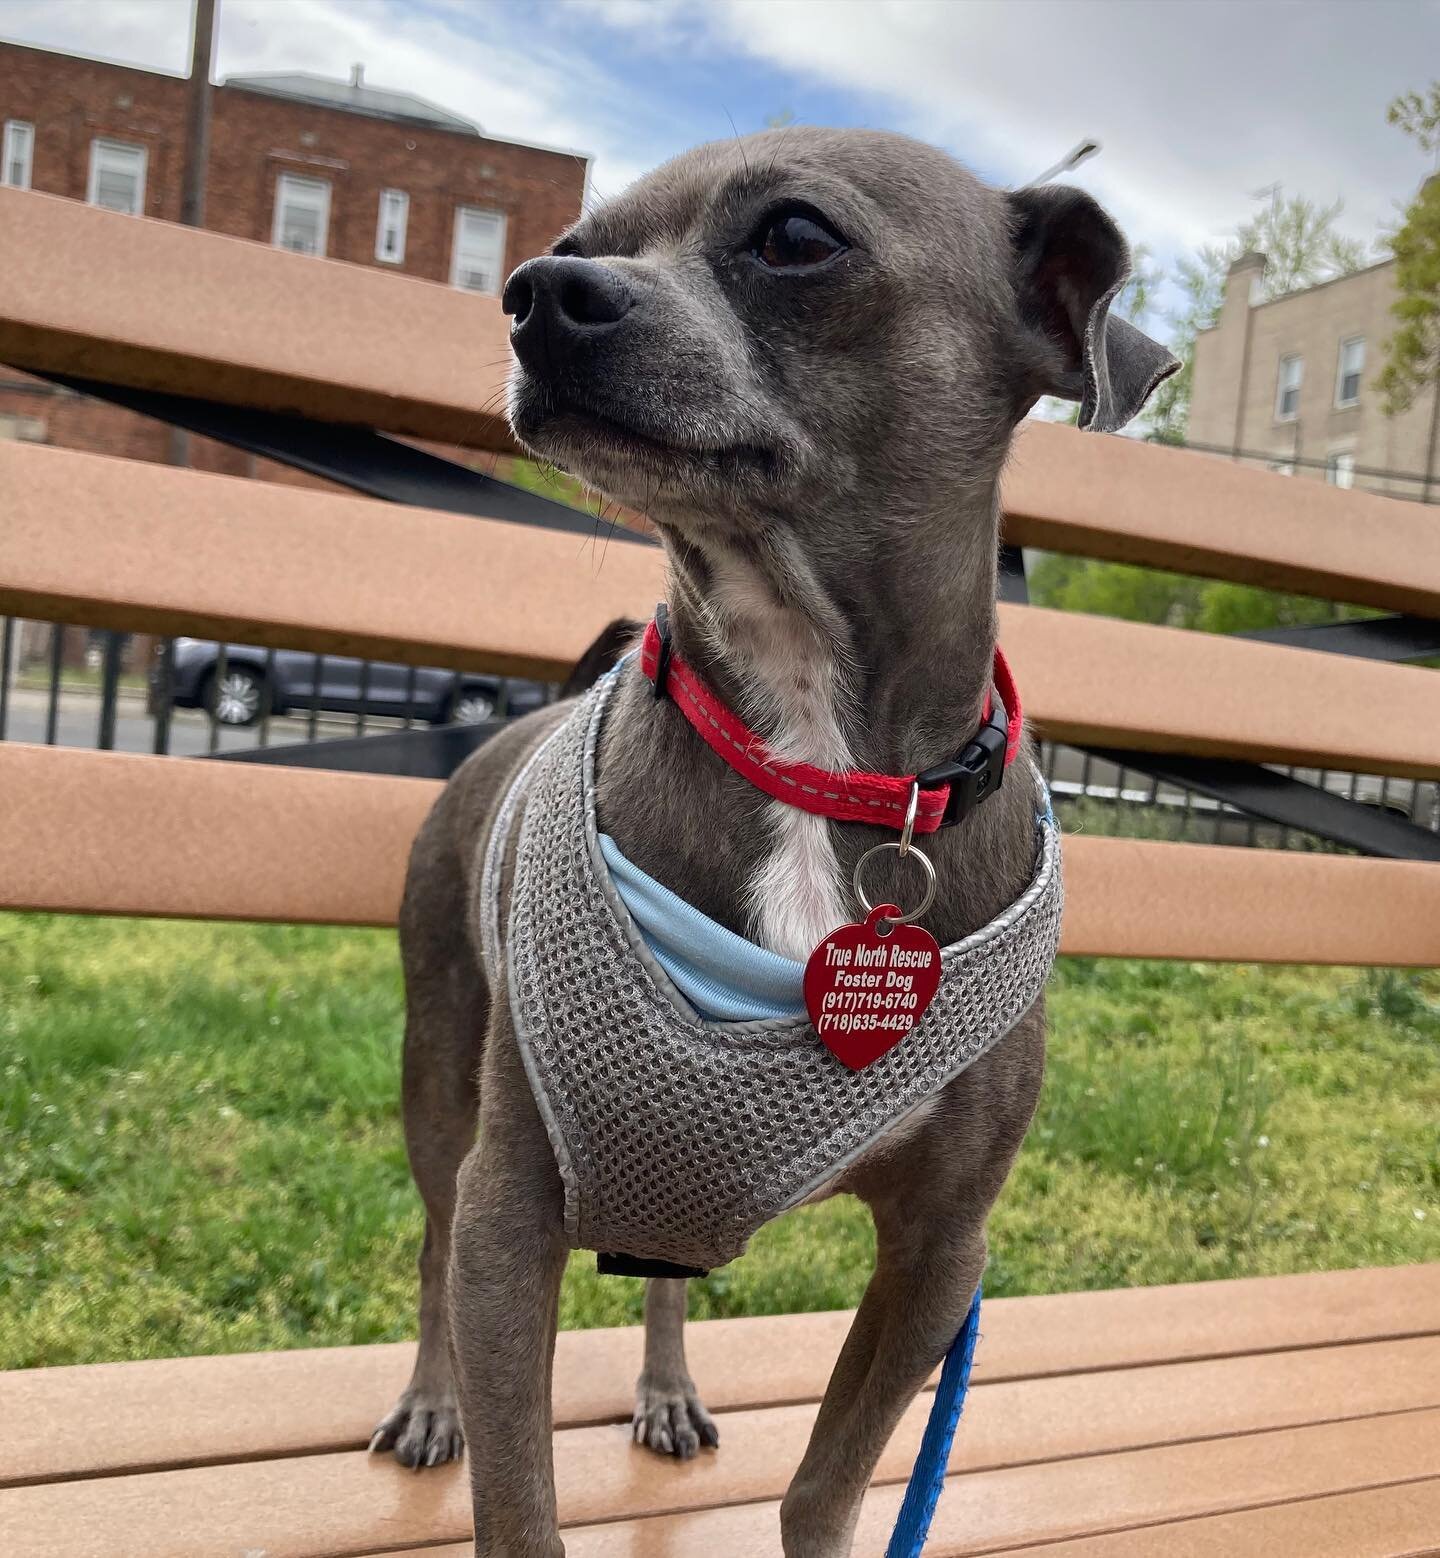 Meet Dobie! 💙
This 7 year old pocket sized pup is a really great addition to almost any home. His foster family has kids and dogs, and he was previoulsy fostered with kids, cats and dogs before he came to us.

His foster mom says:
&quot;Dobie has be